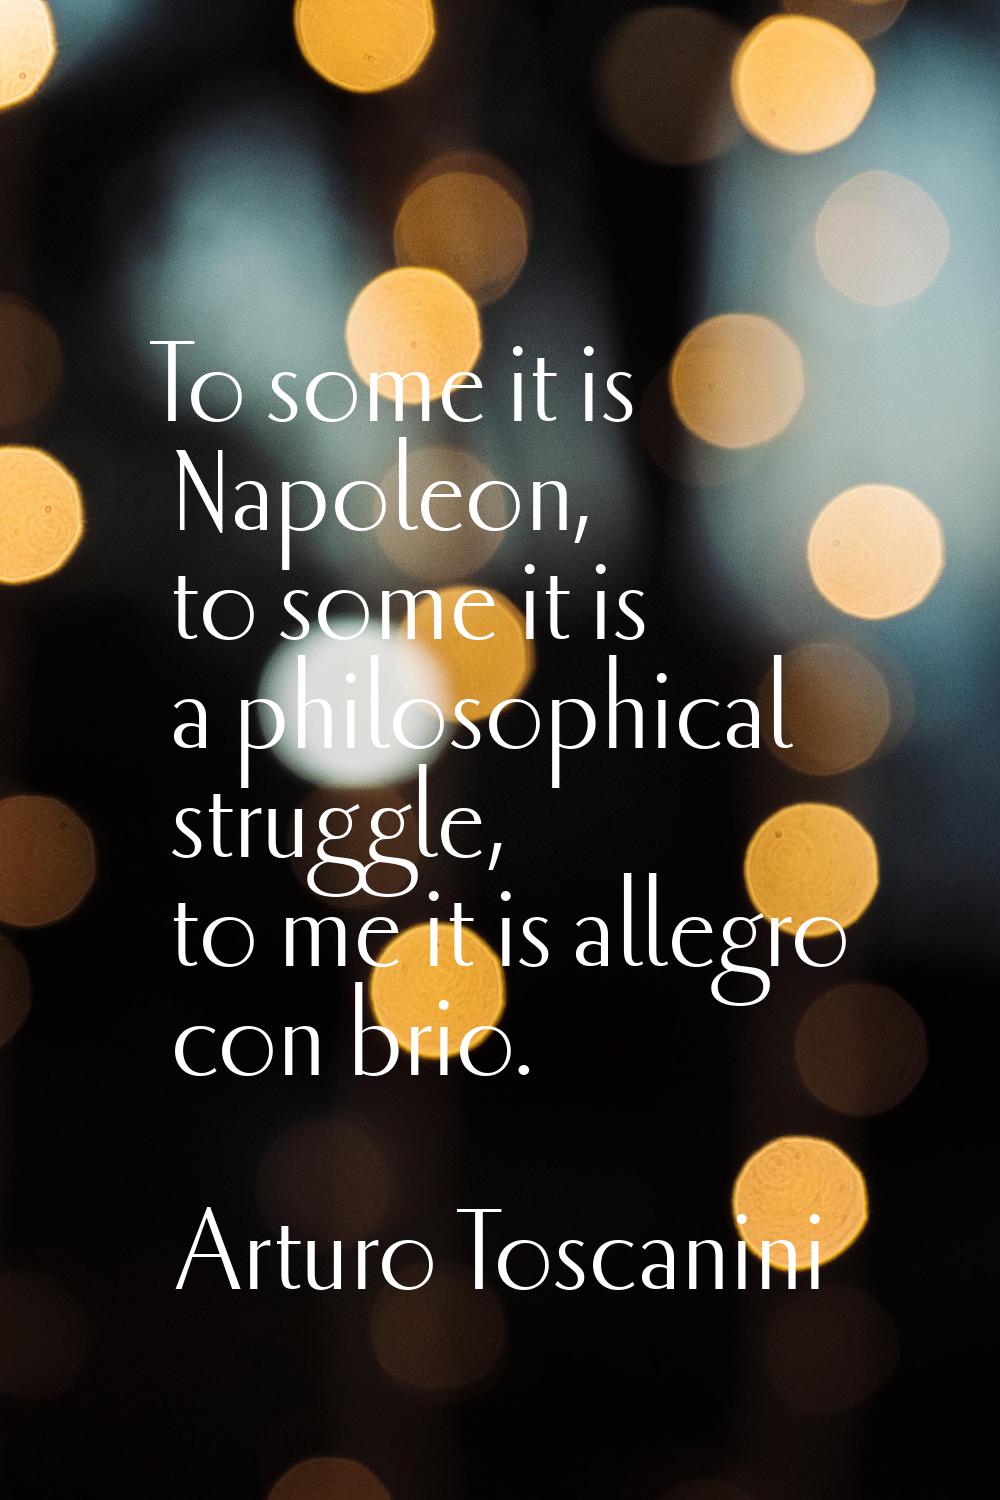 To some it is Napoleon, to some it is a philosophical struggle, to me it is allegro con brio.